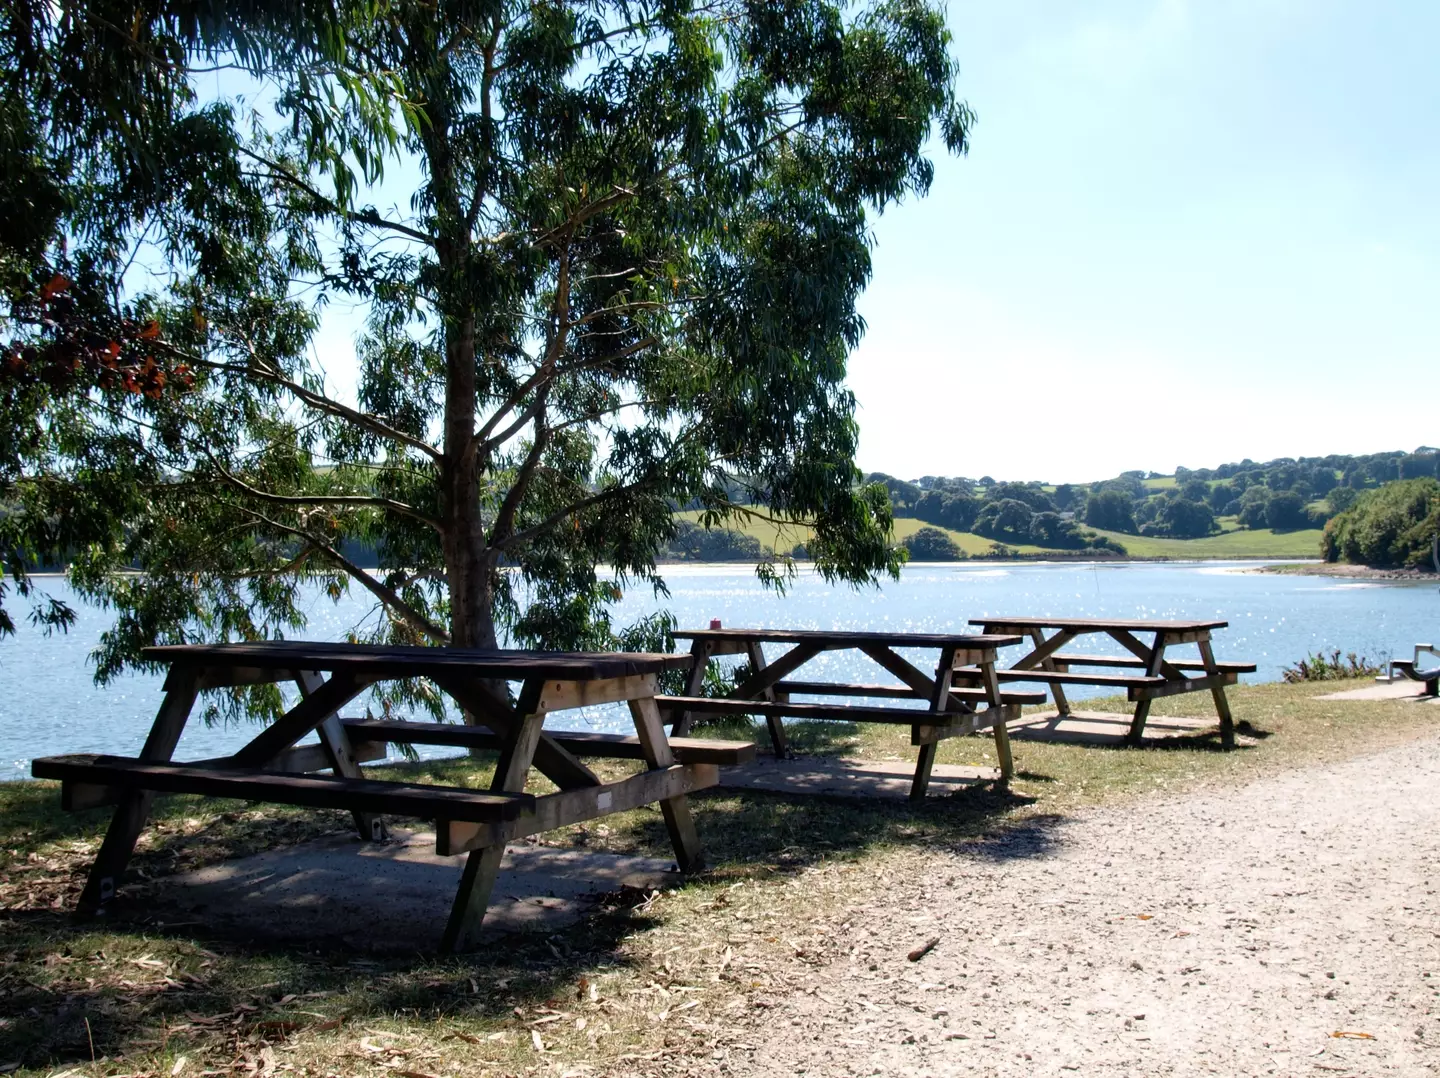 The picnic benches were 'reserved'.